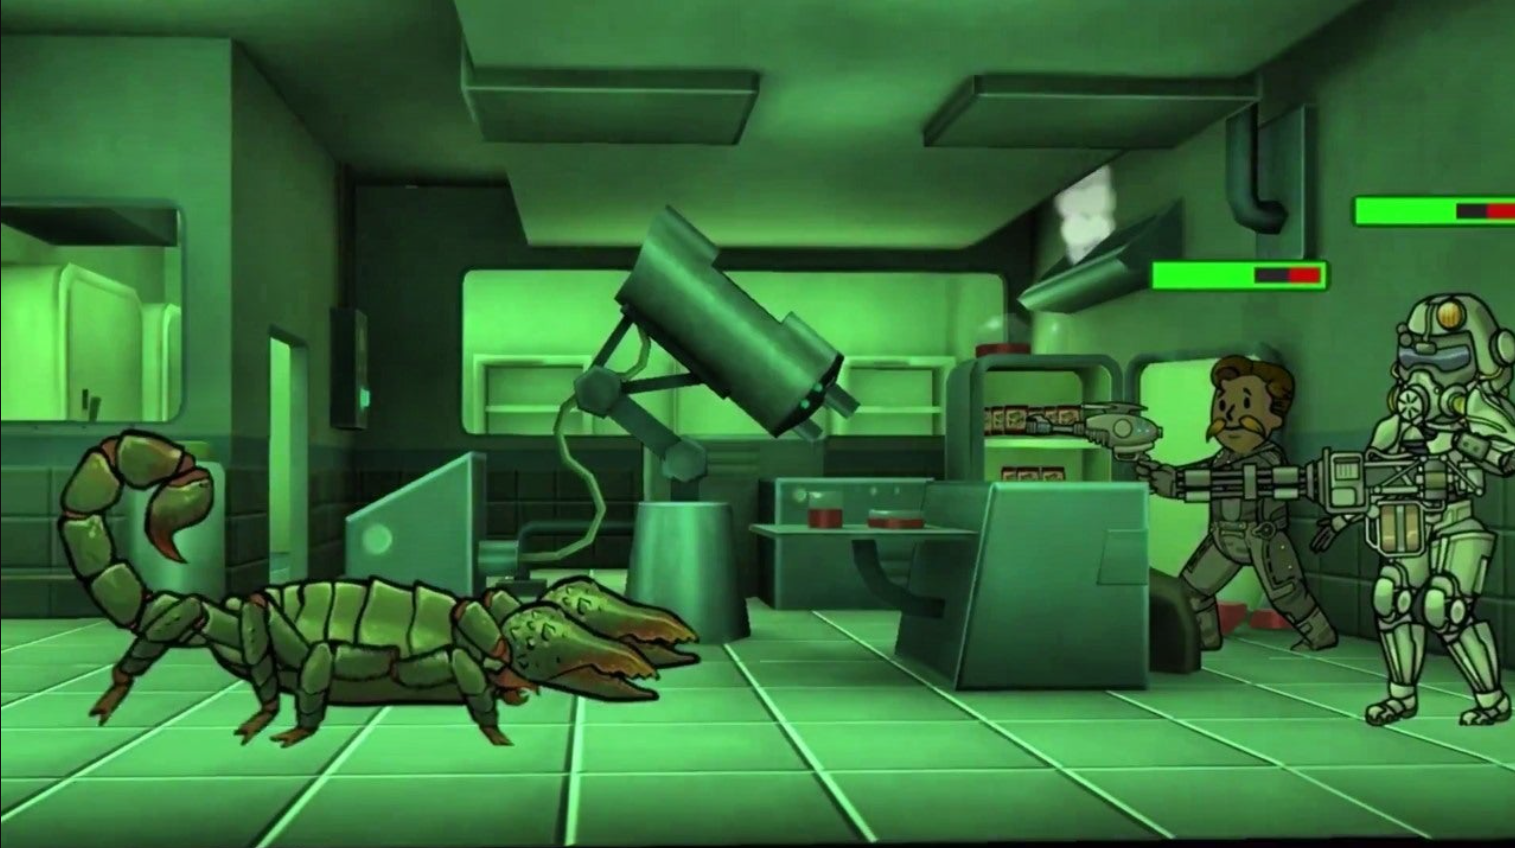 Radscorpians Attacking in Fallout Shelter